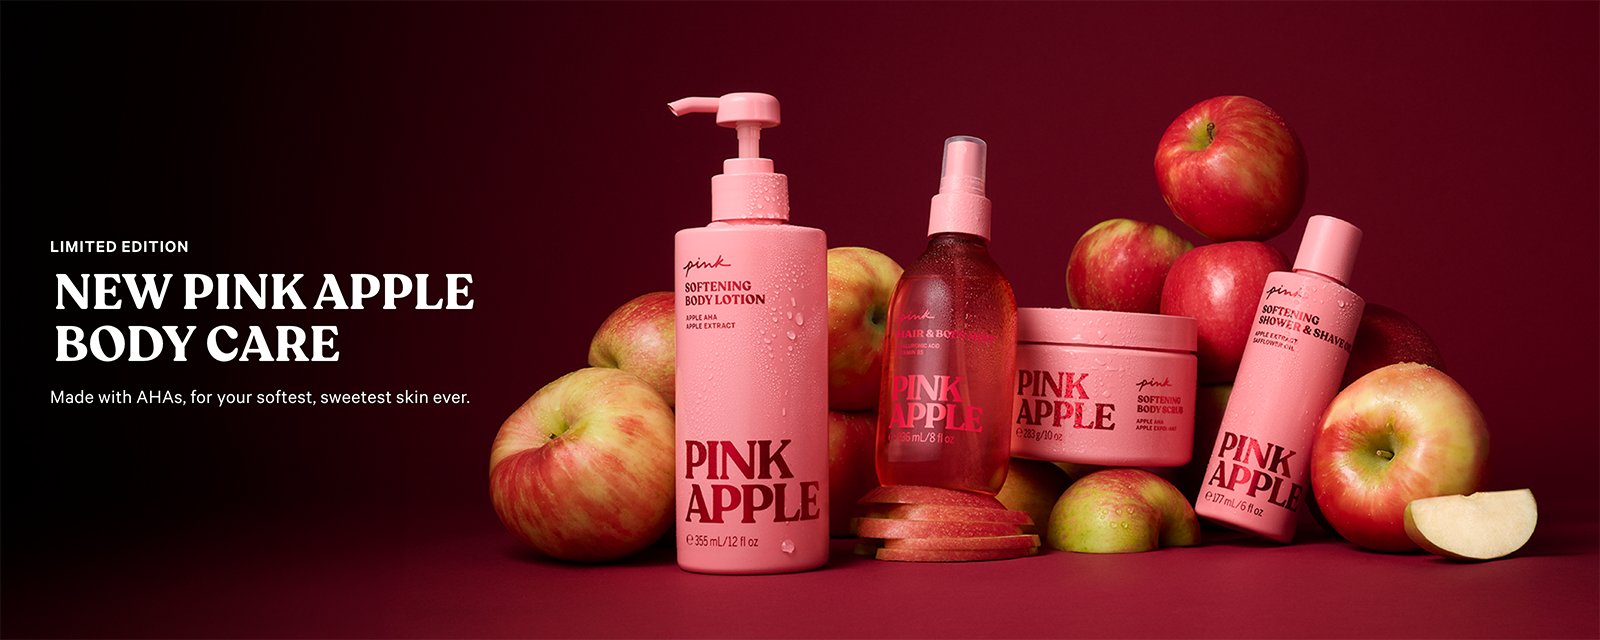 New! Limited Edition. Pink Apple Body Care. Made with alpha hydroxy acids, for your softest, sweetest skin ever.